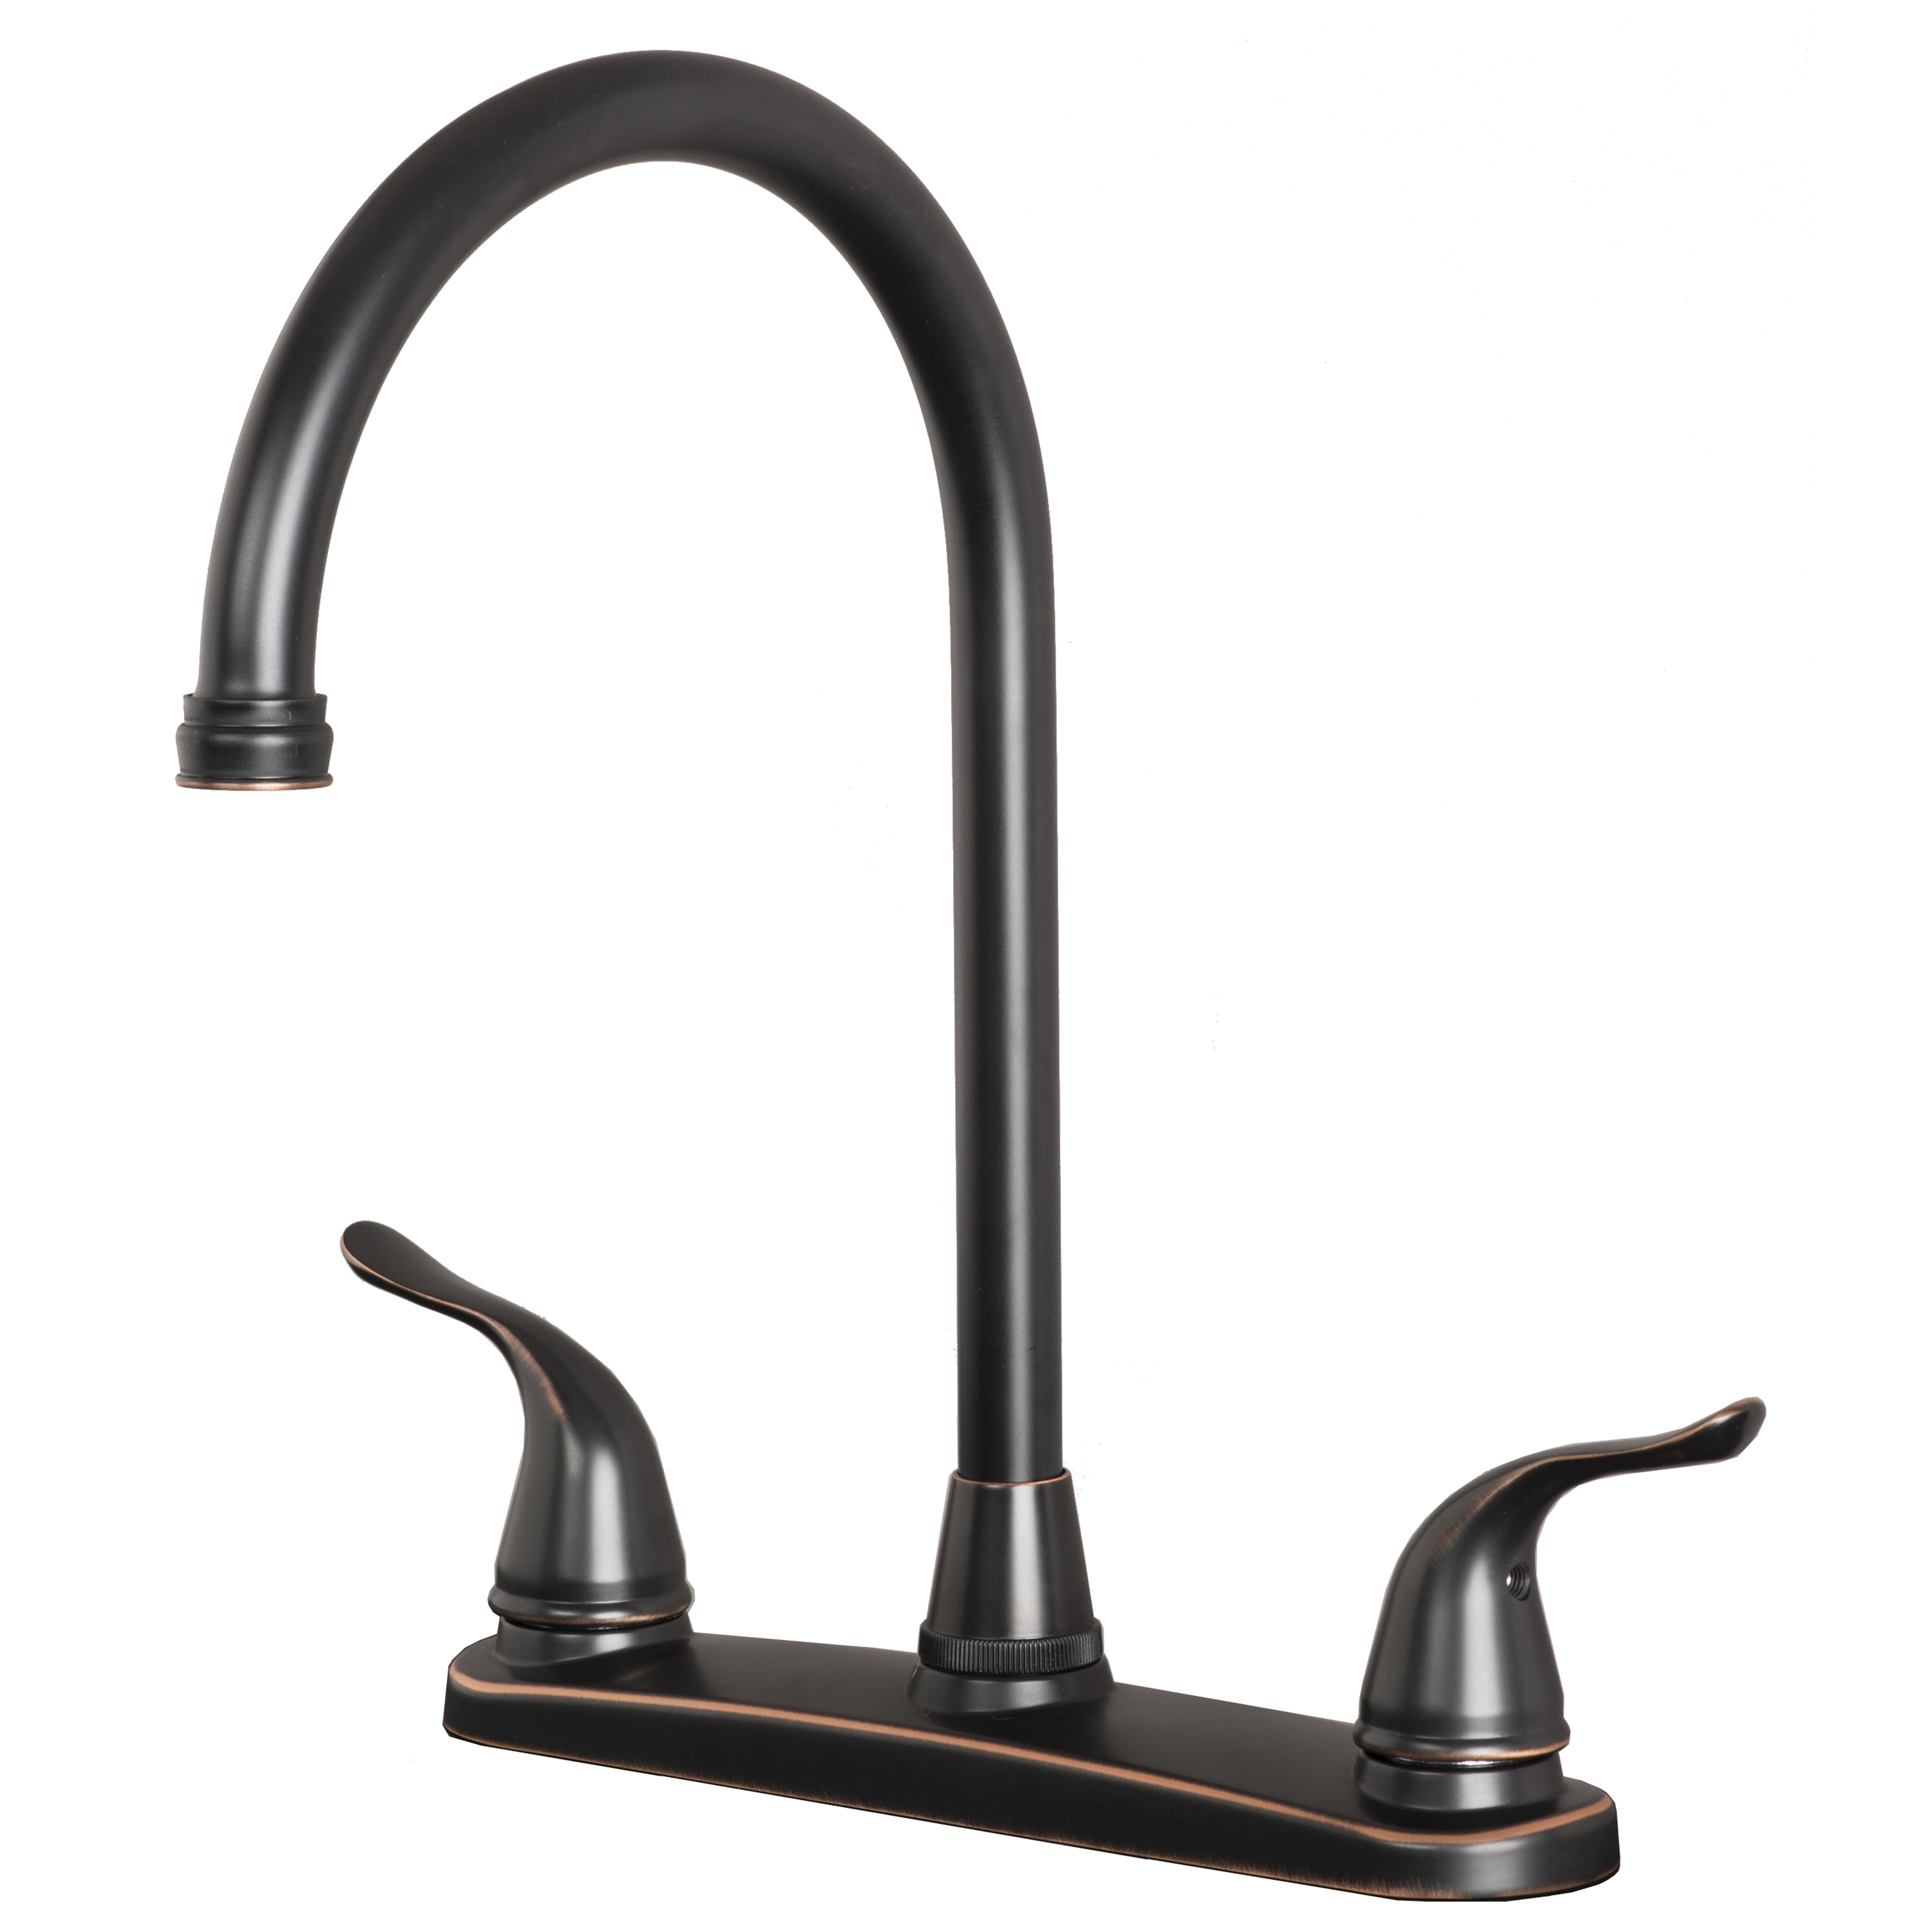 Builders Shoppe 1270tb Two Handle High Arc Kitchen Faucet For Three Hole Kitchen Sink Oil Rubbed Bronze Finish Walmart Com Walmart Com